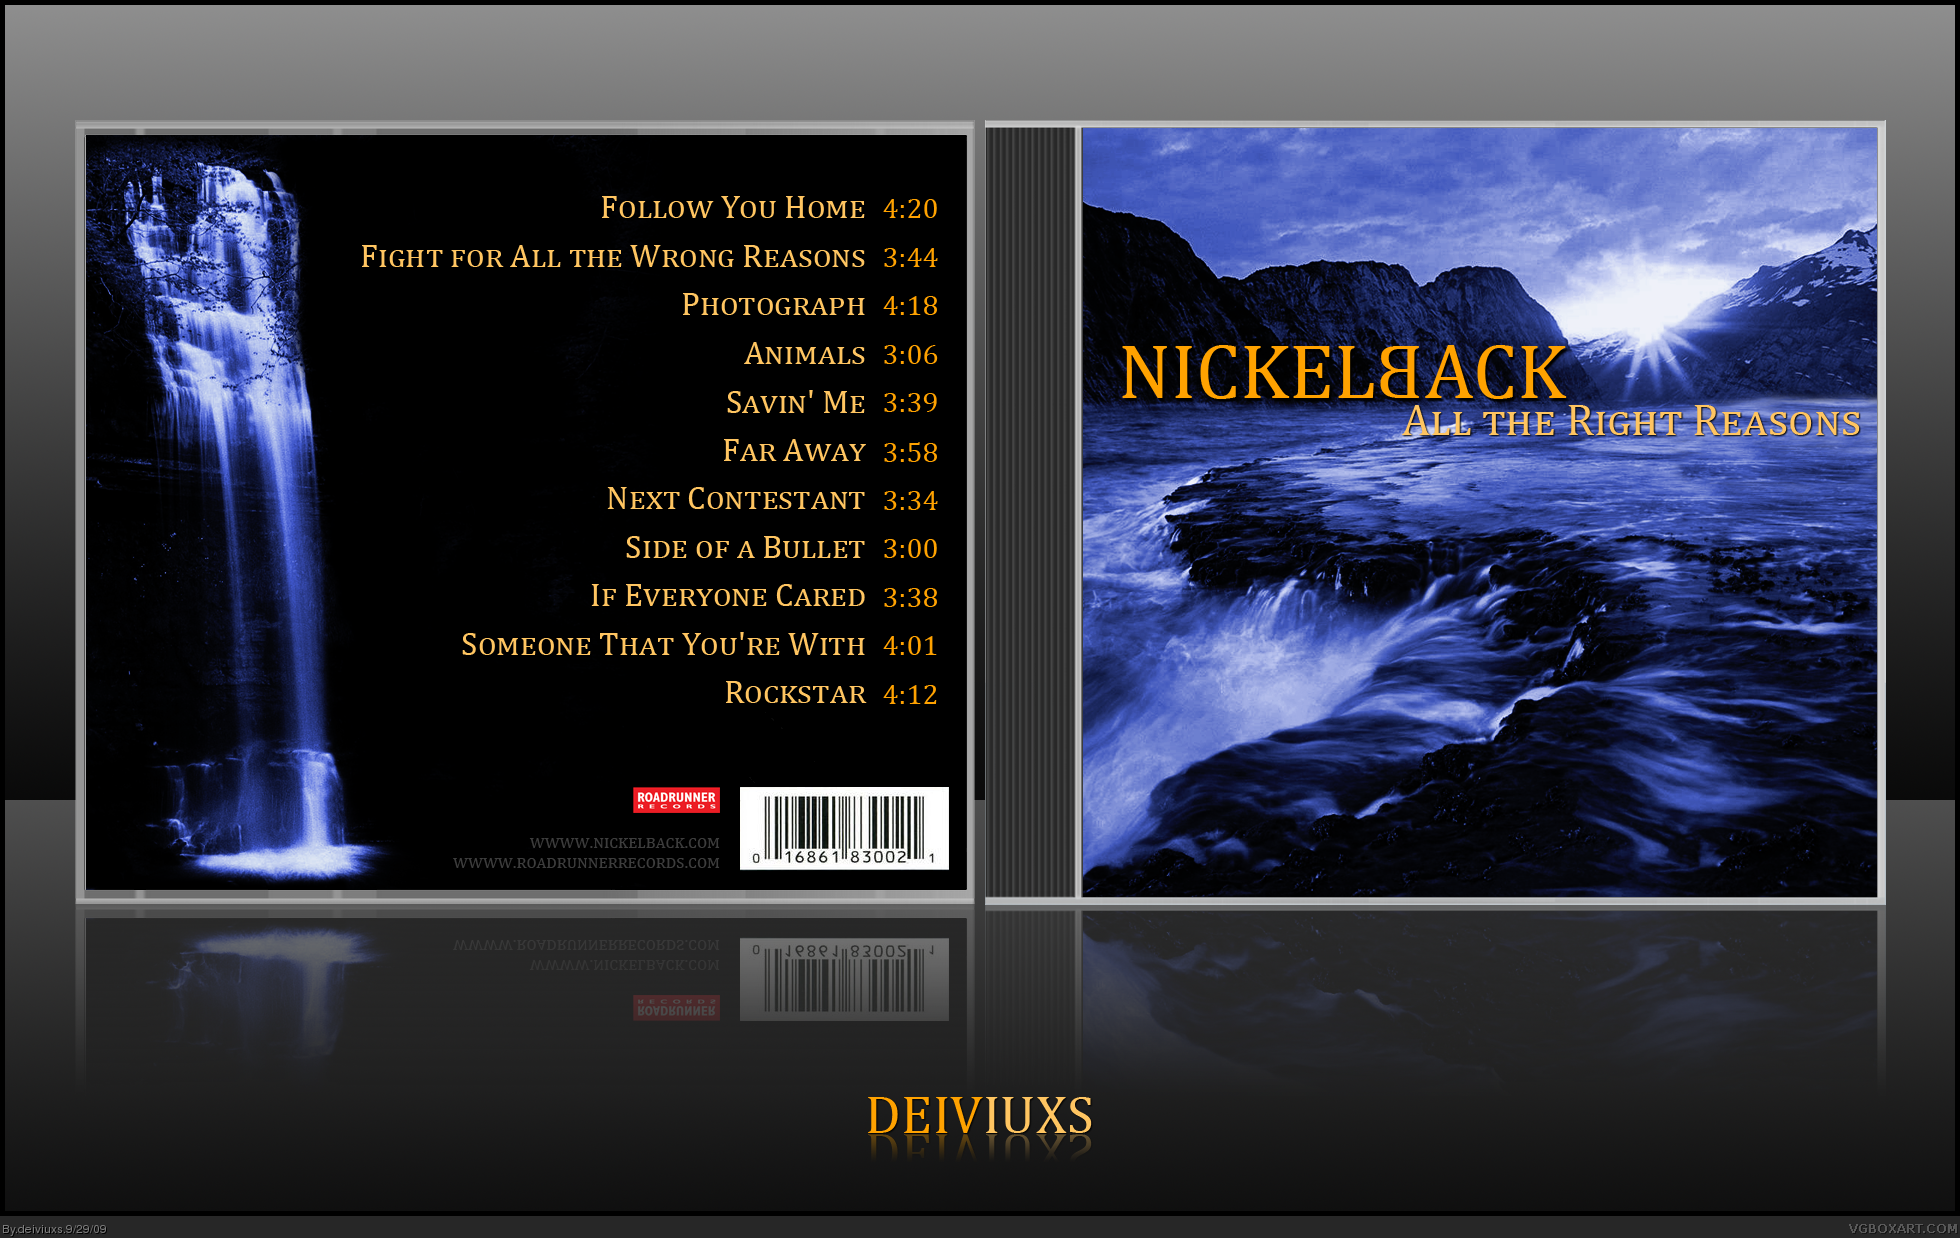 Nickelback - All the Right Reasons box cover